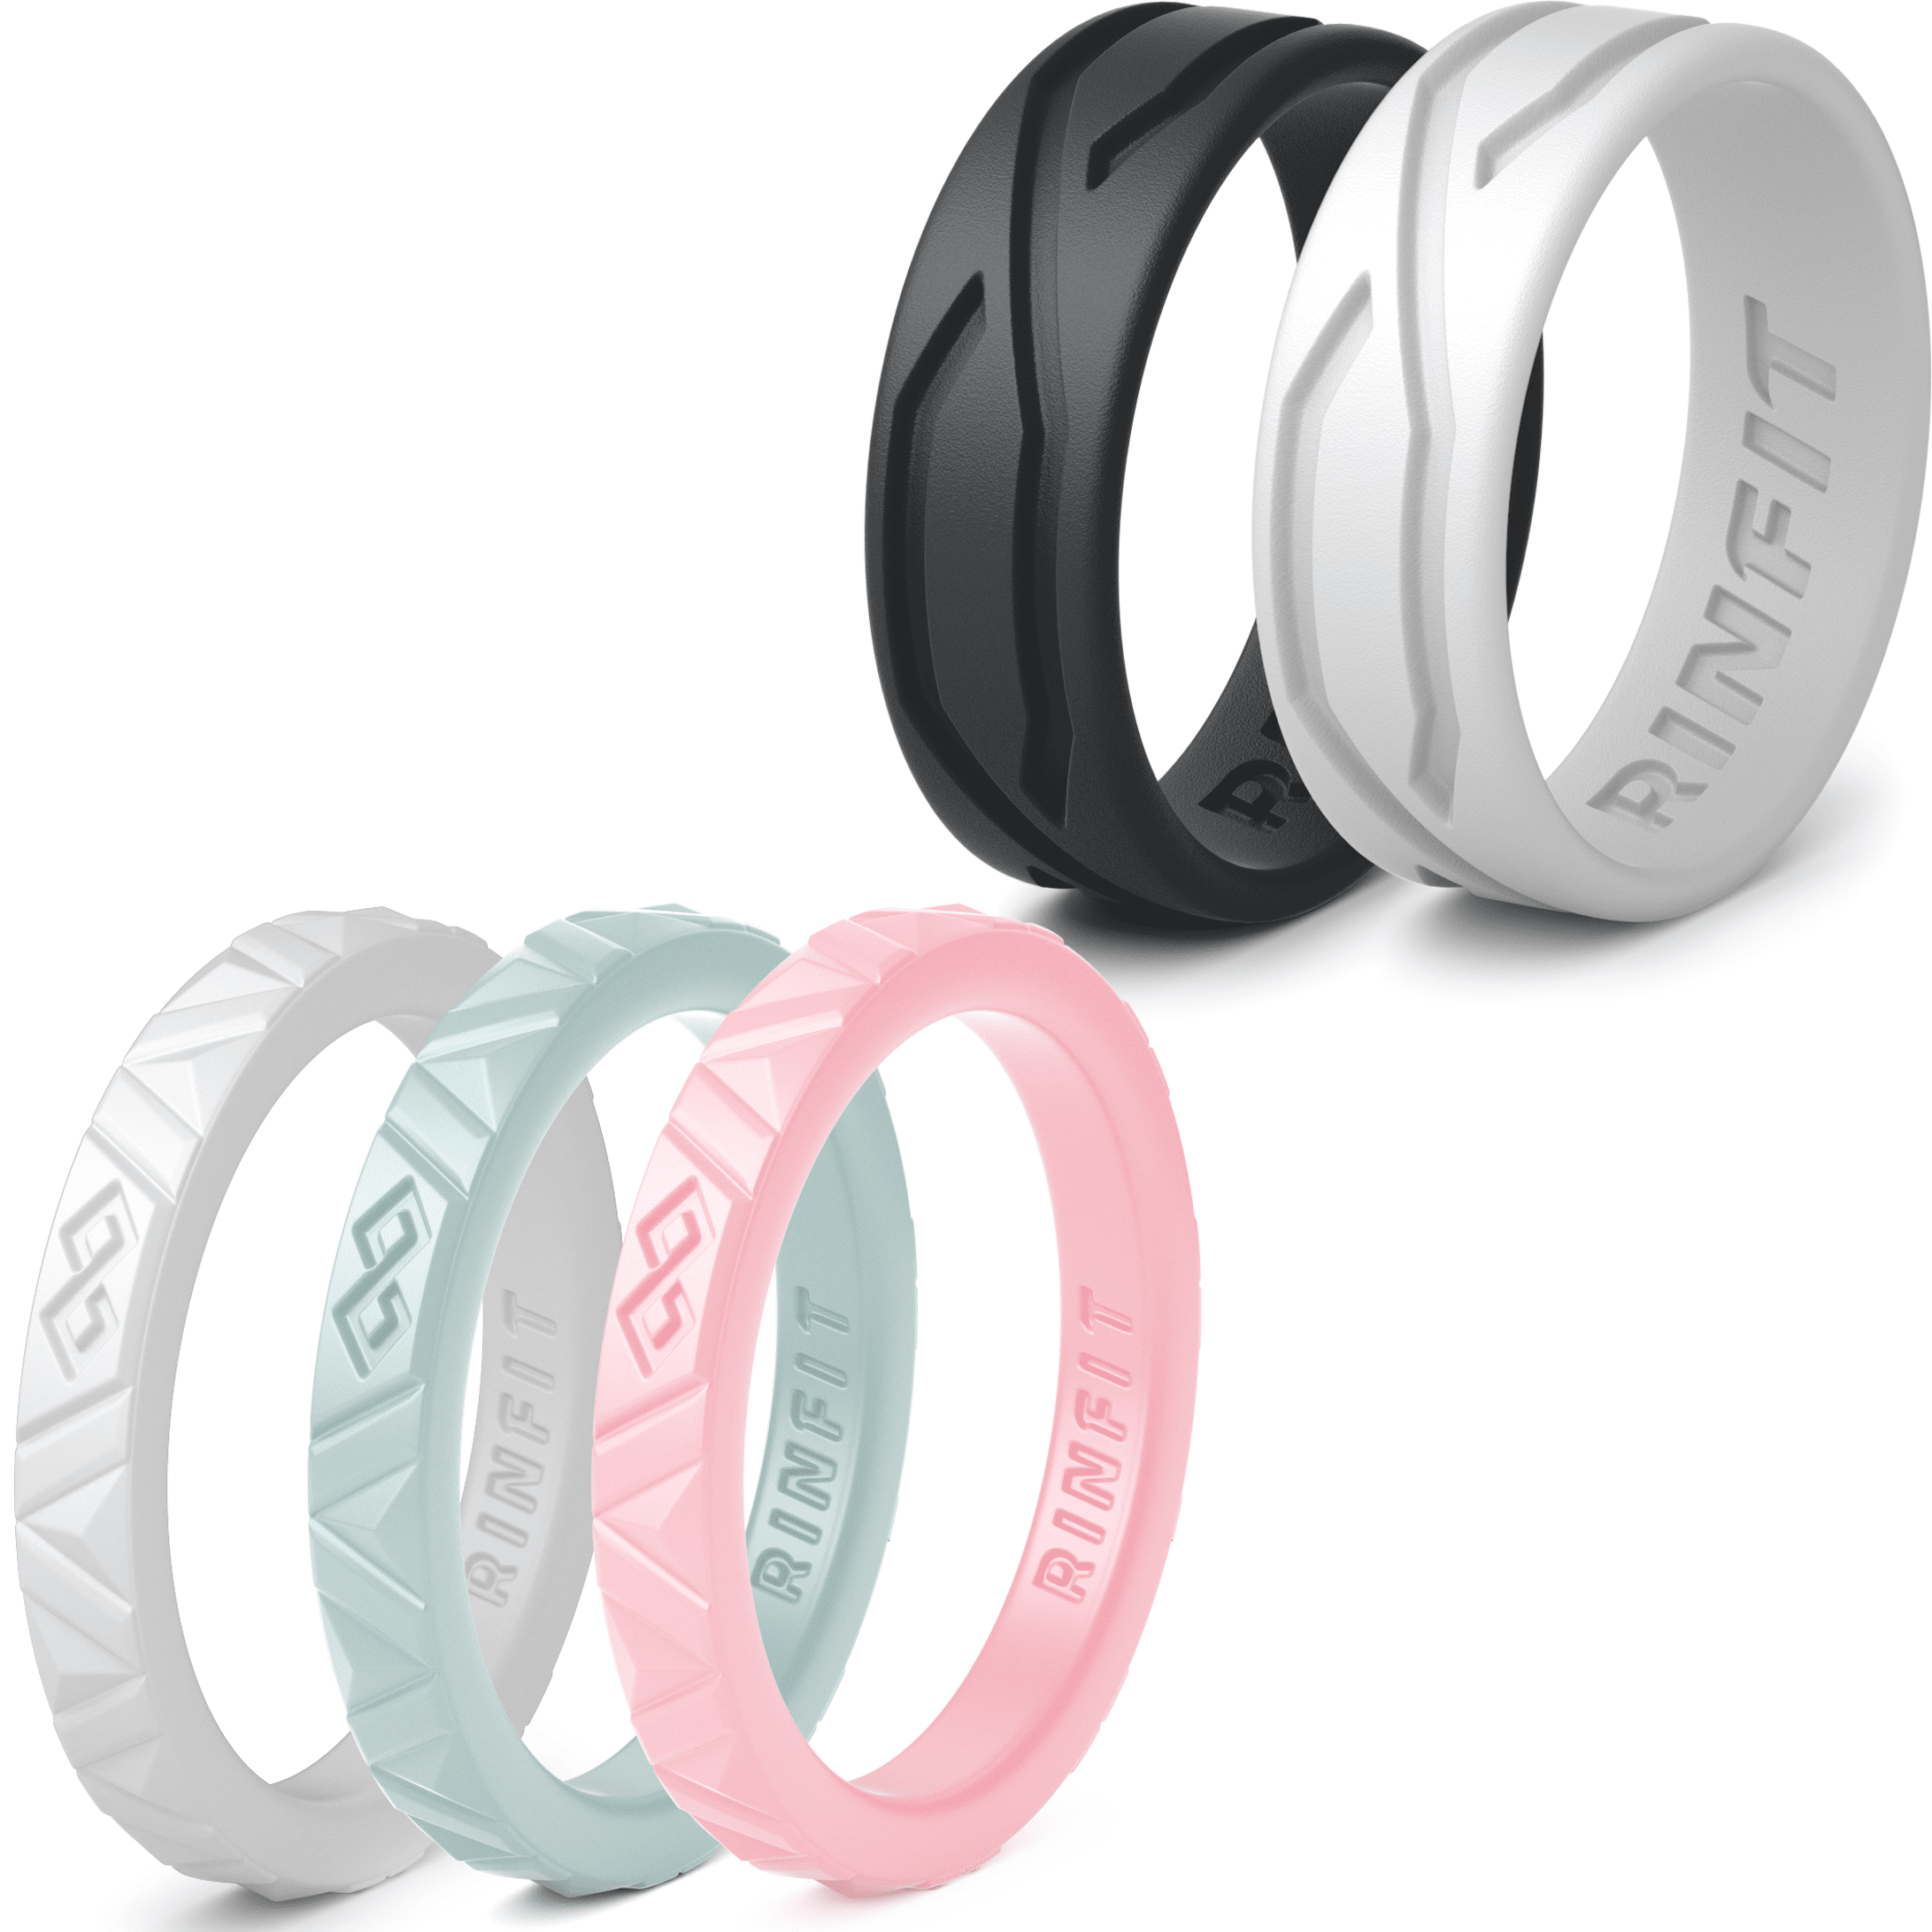 Designed & Soft Women's Wedding Bands U.S Silicone Rubber Design Patent Pending 2 Pack & Singles Size 4-10 Silicone Wedding Ring for Women by Rinfit Rings 